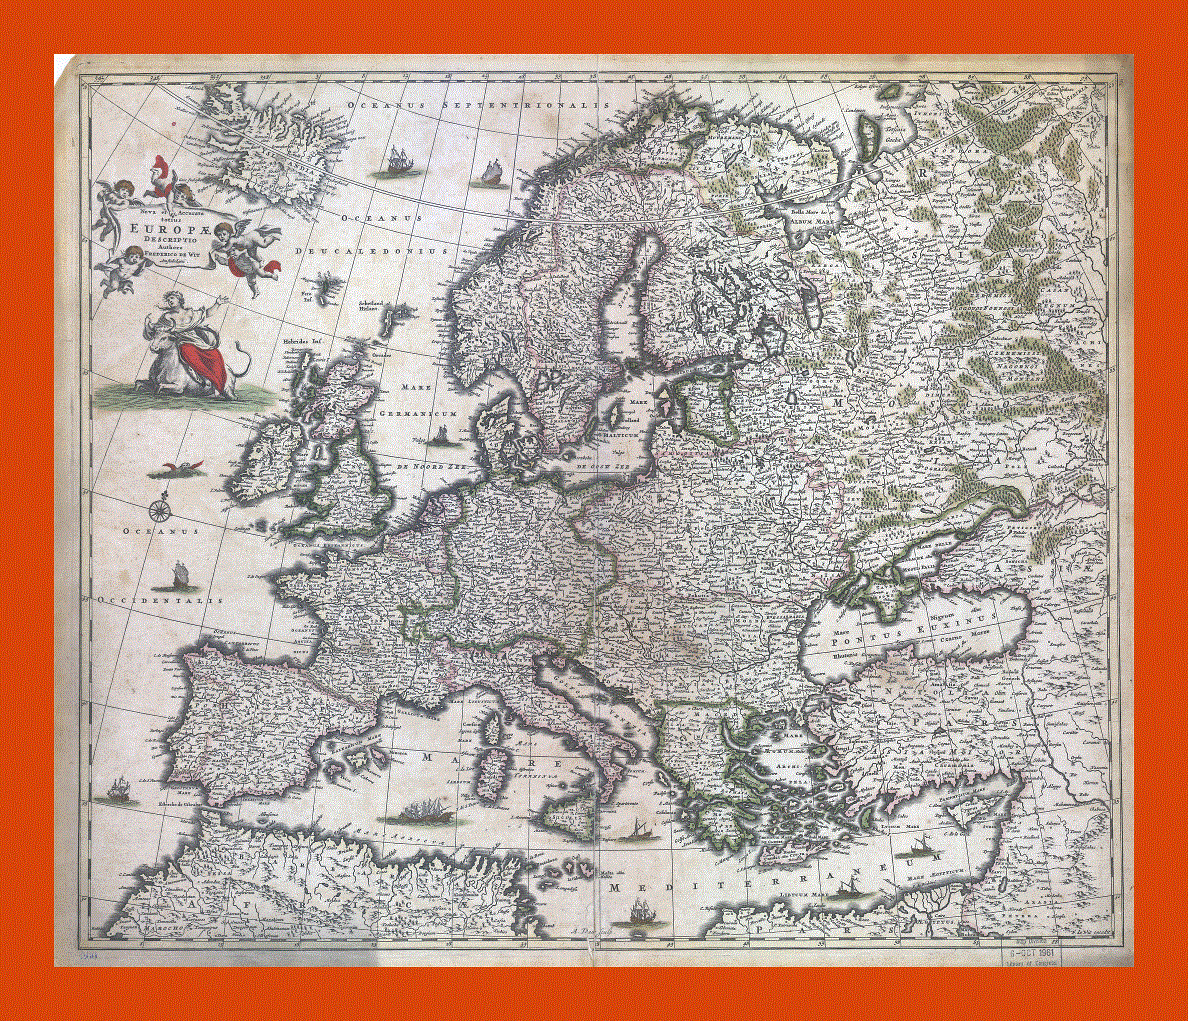 Old map of Europe - 1700